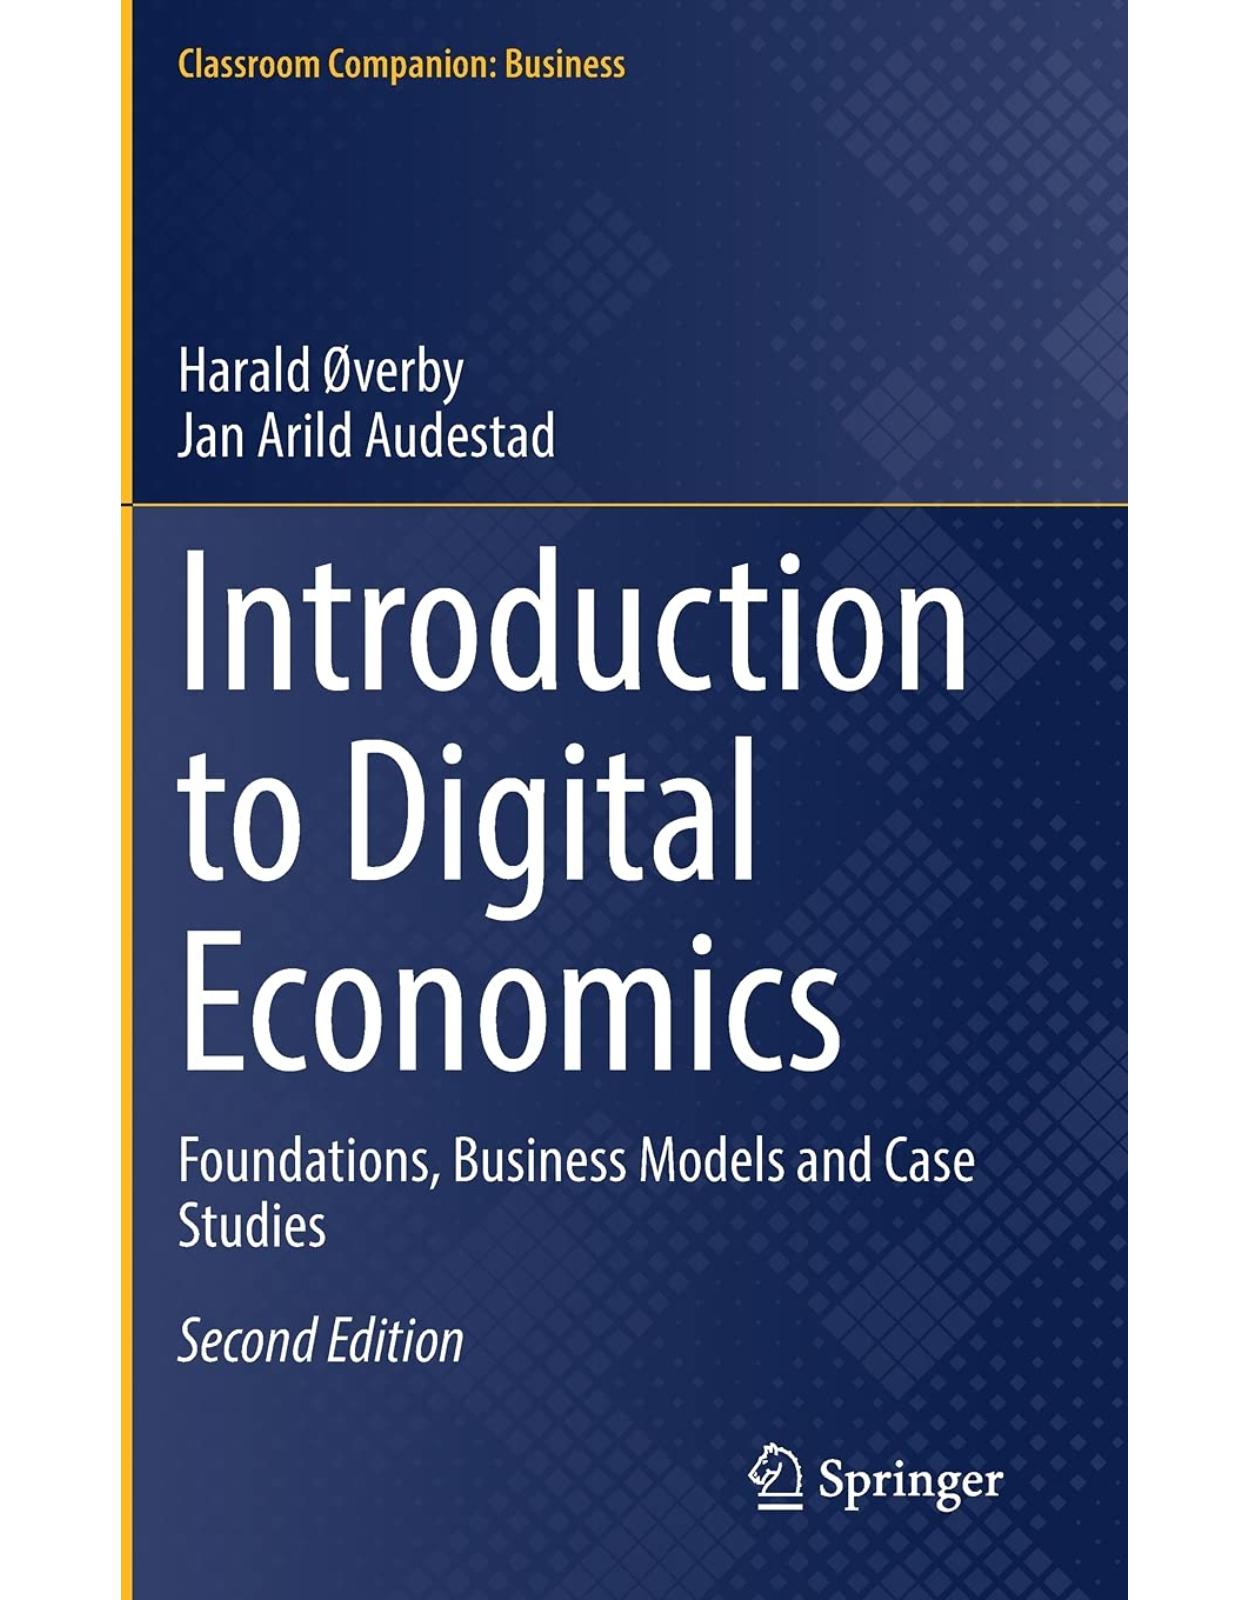 Introduction to Digital Economics: Foundations, Business Models and Case Studies